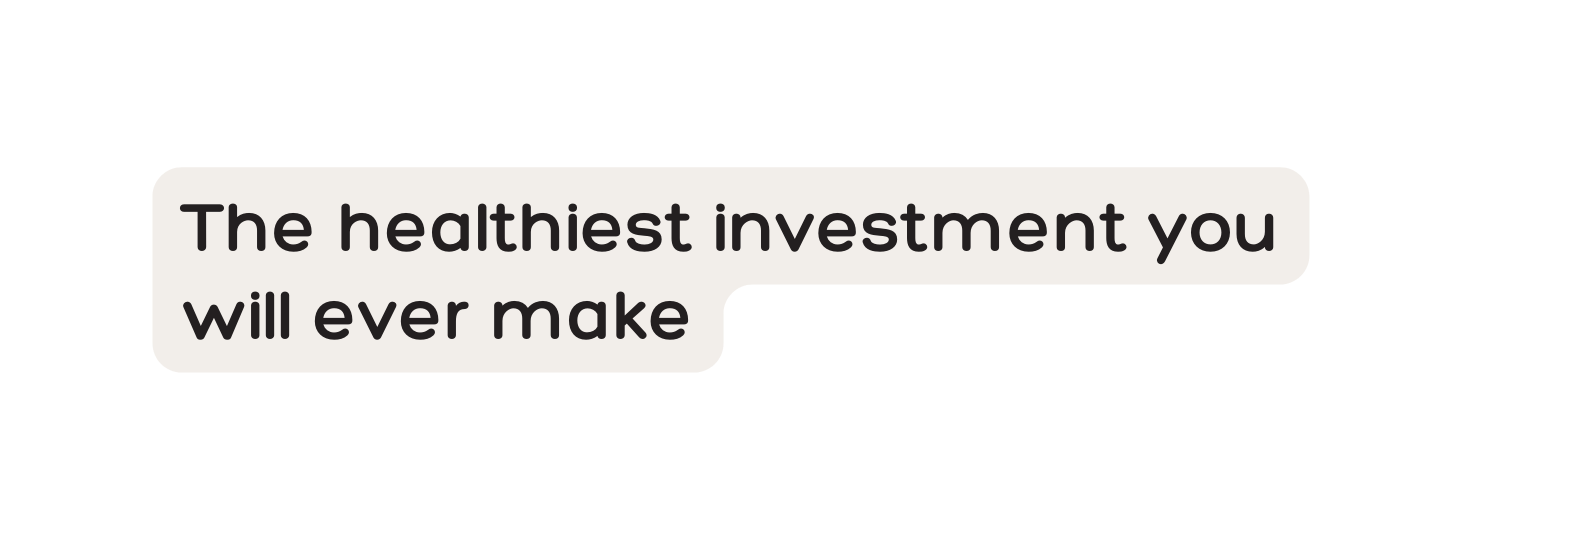 The healthiest investment you will ever make